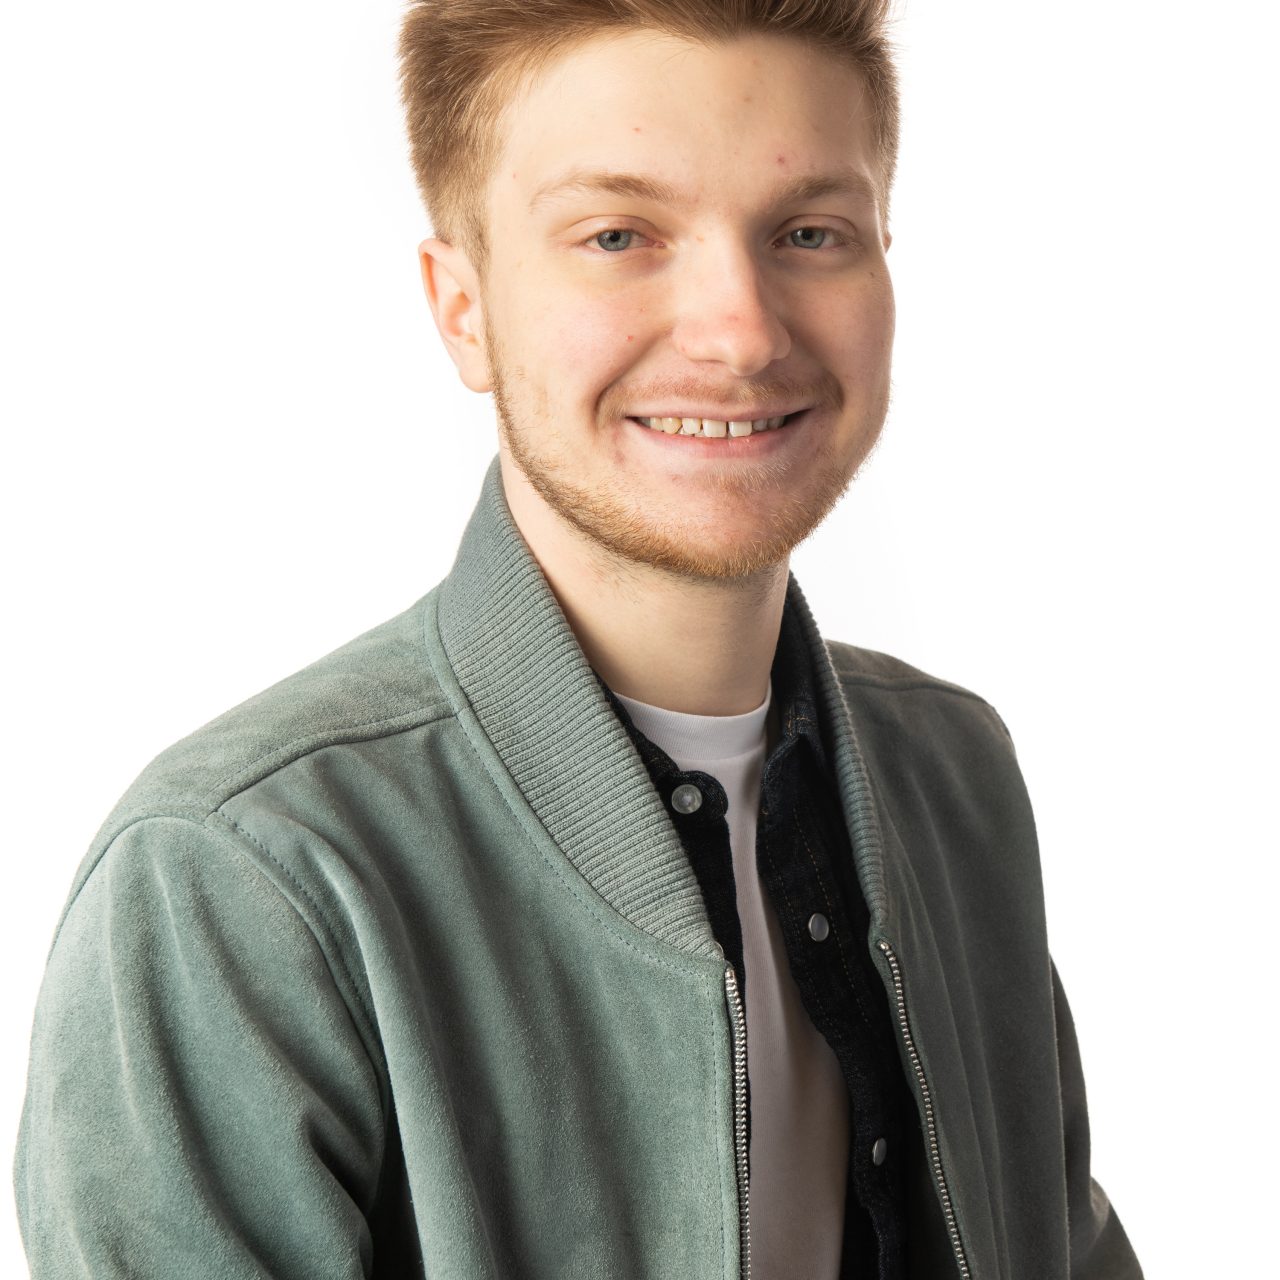 Headshot picture of a Game Design student student